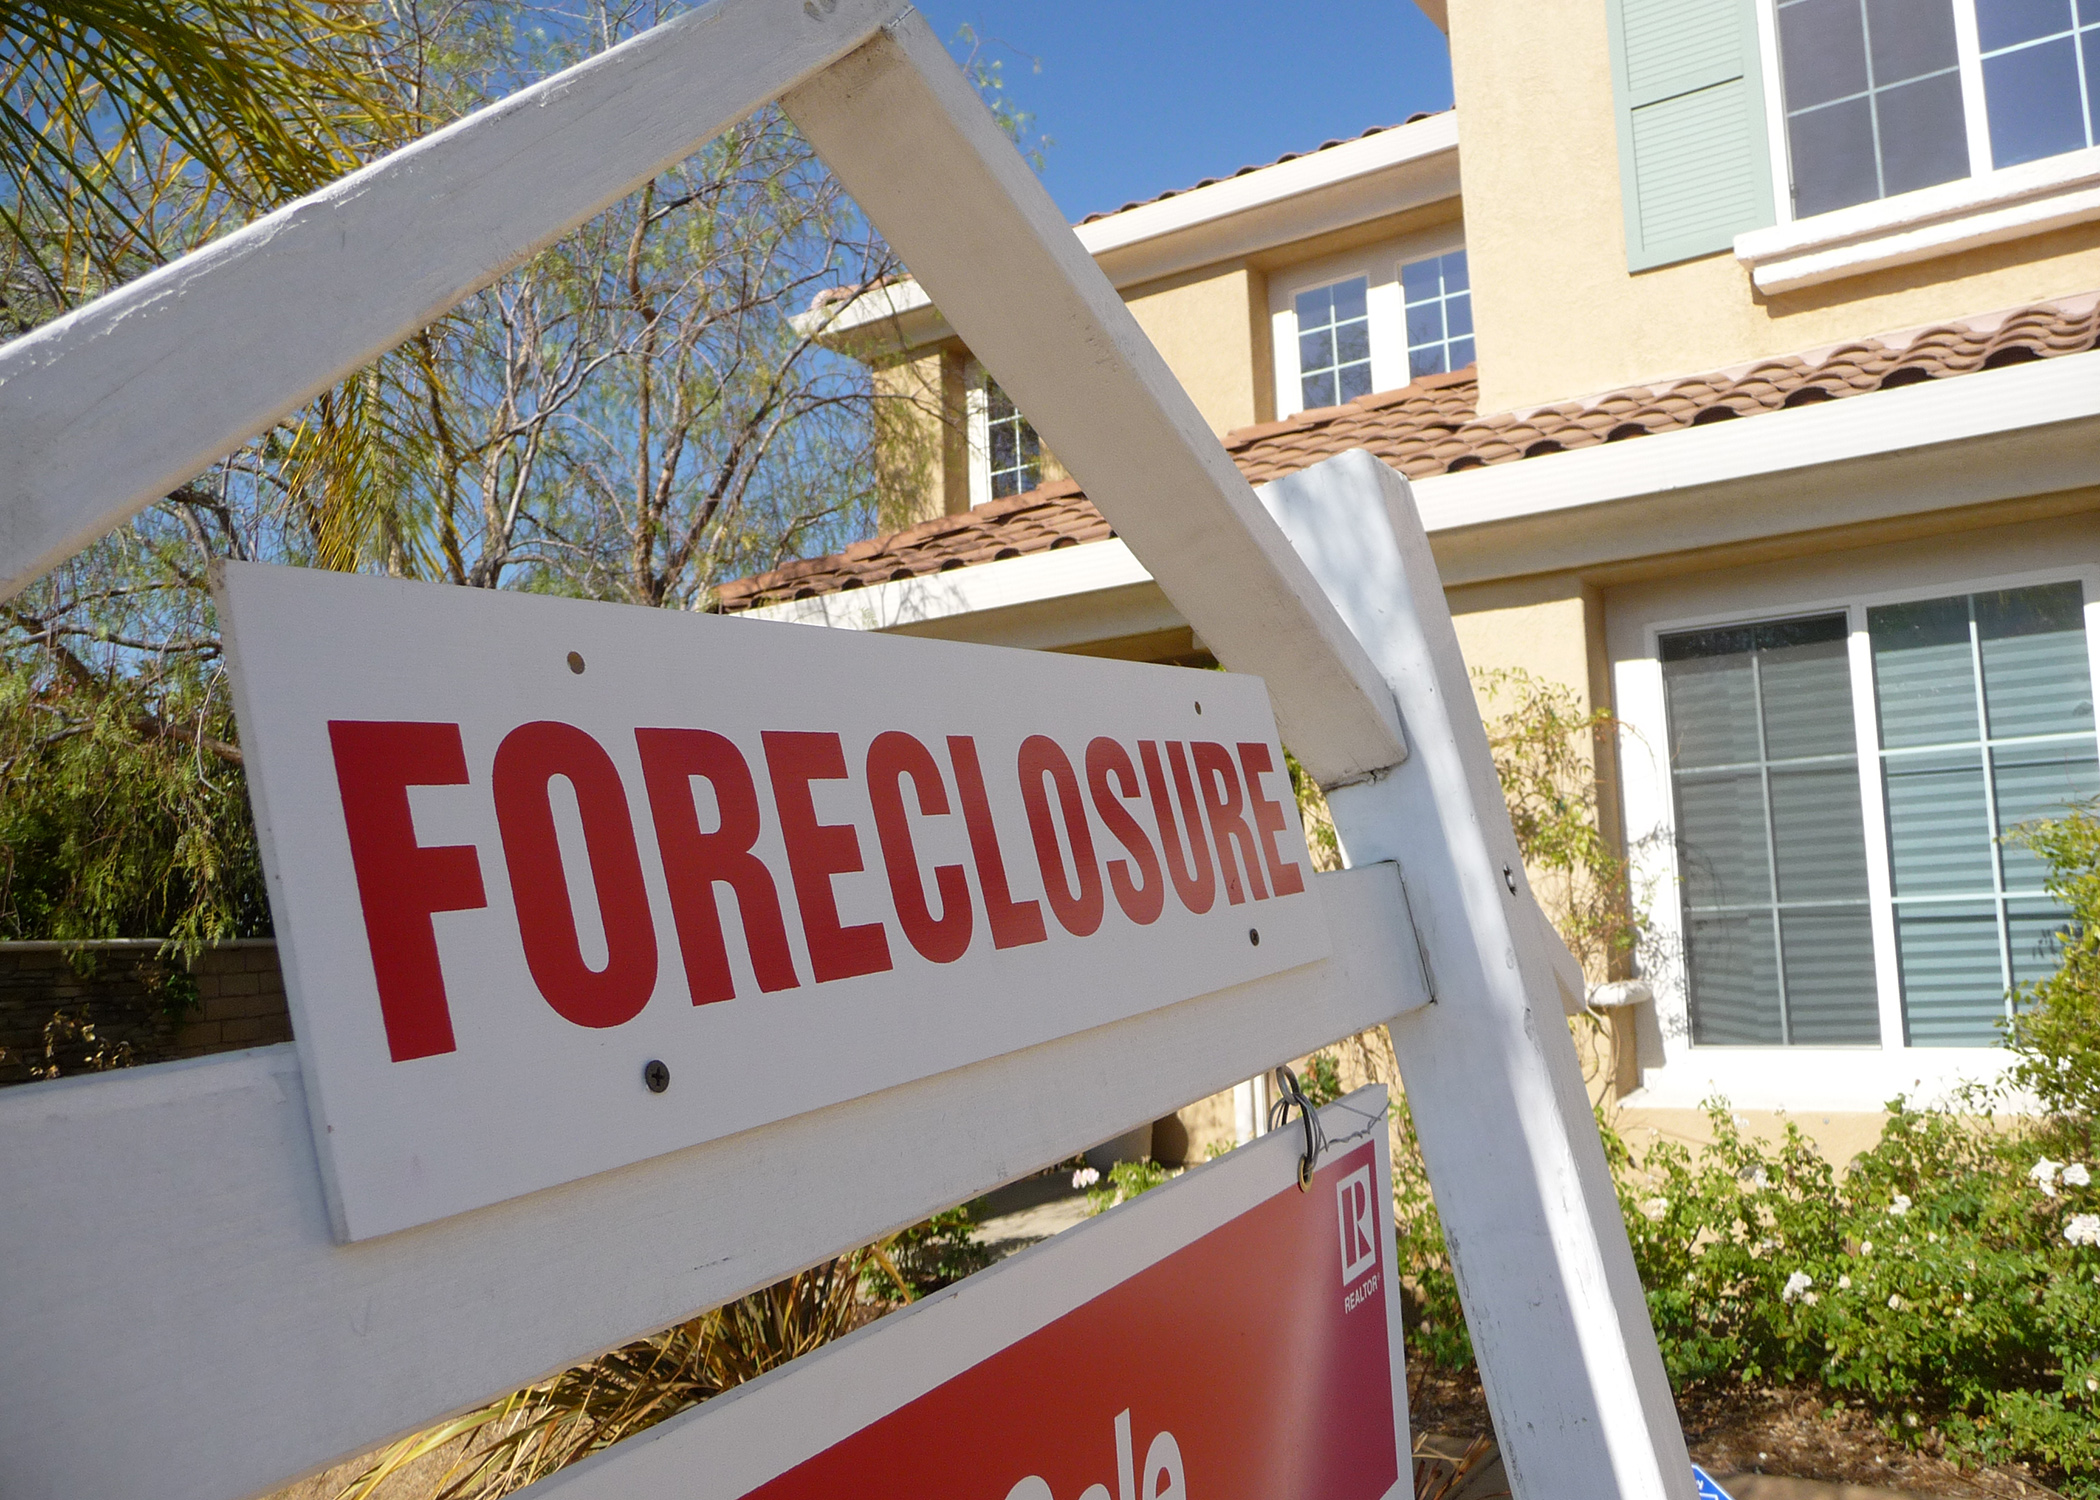 Foreclosure Crisis Lingers in the Black Community